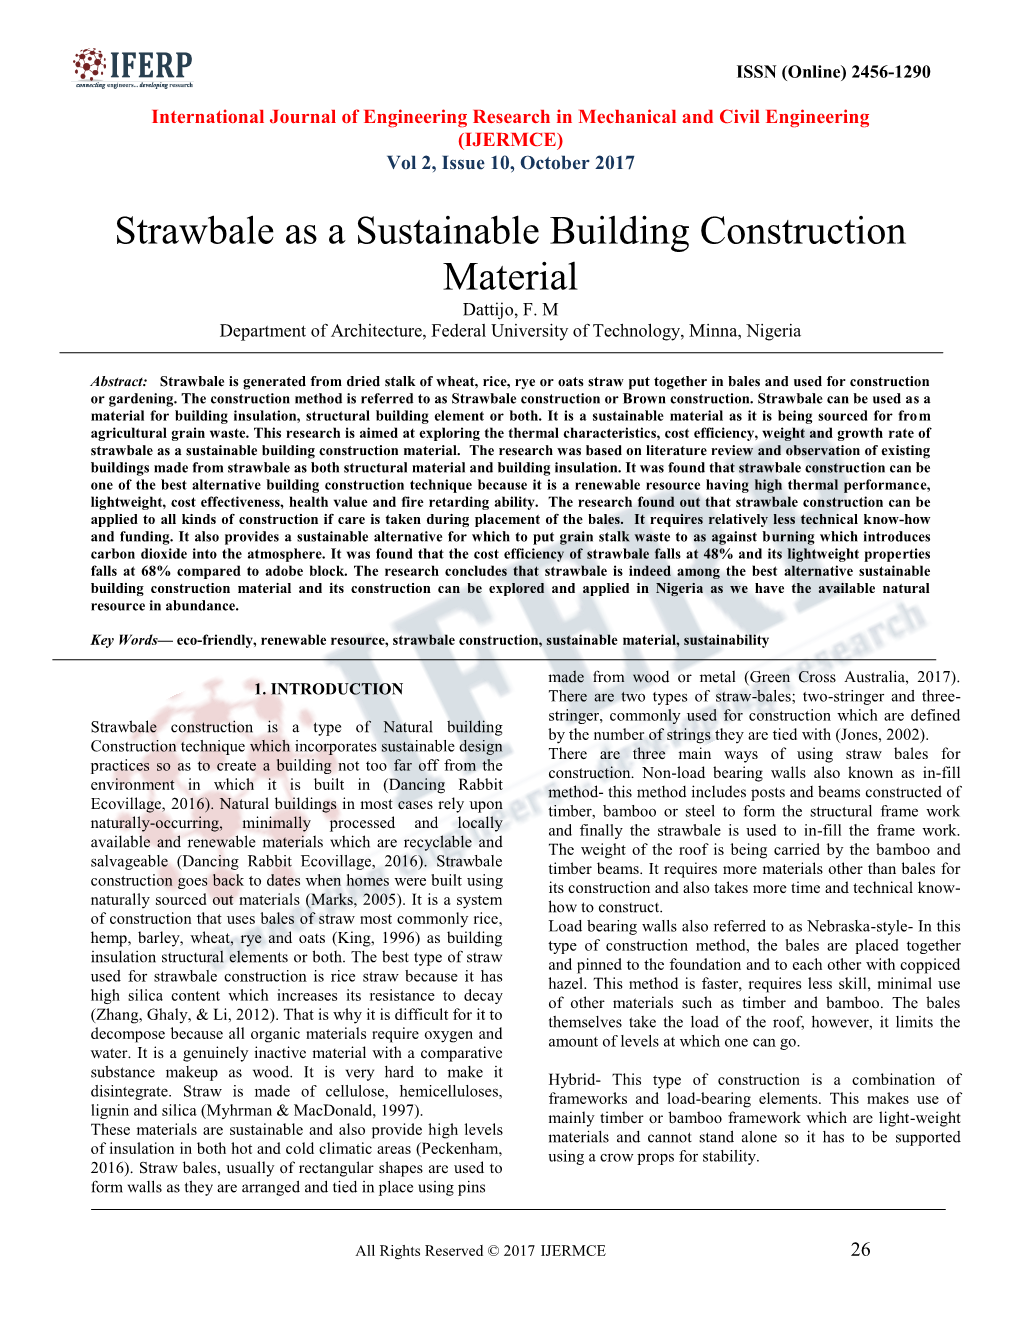 Strawbale As a Sustainable Building Construction Material Dattijo, F